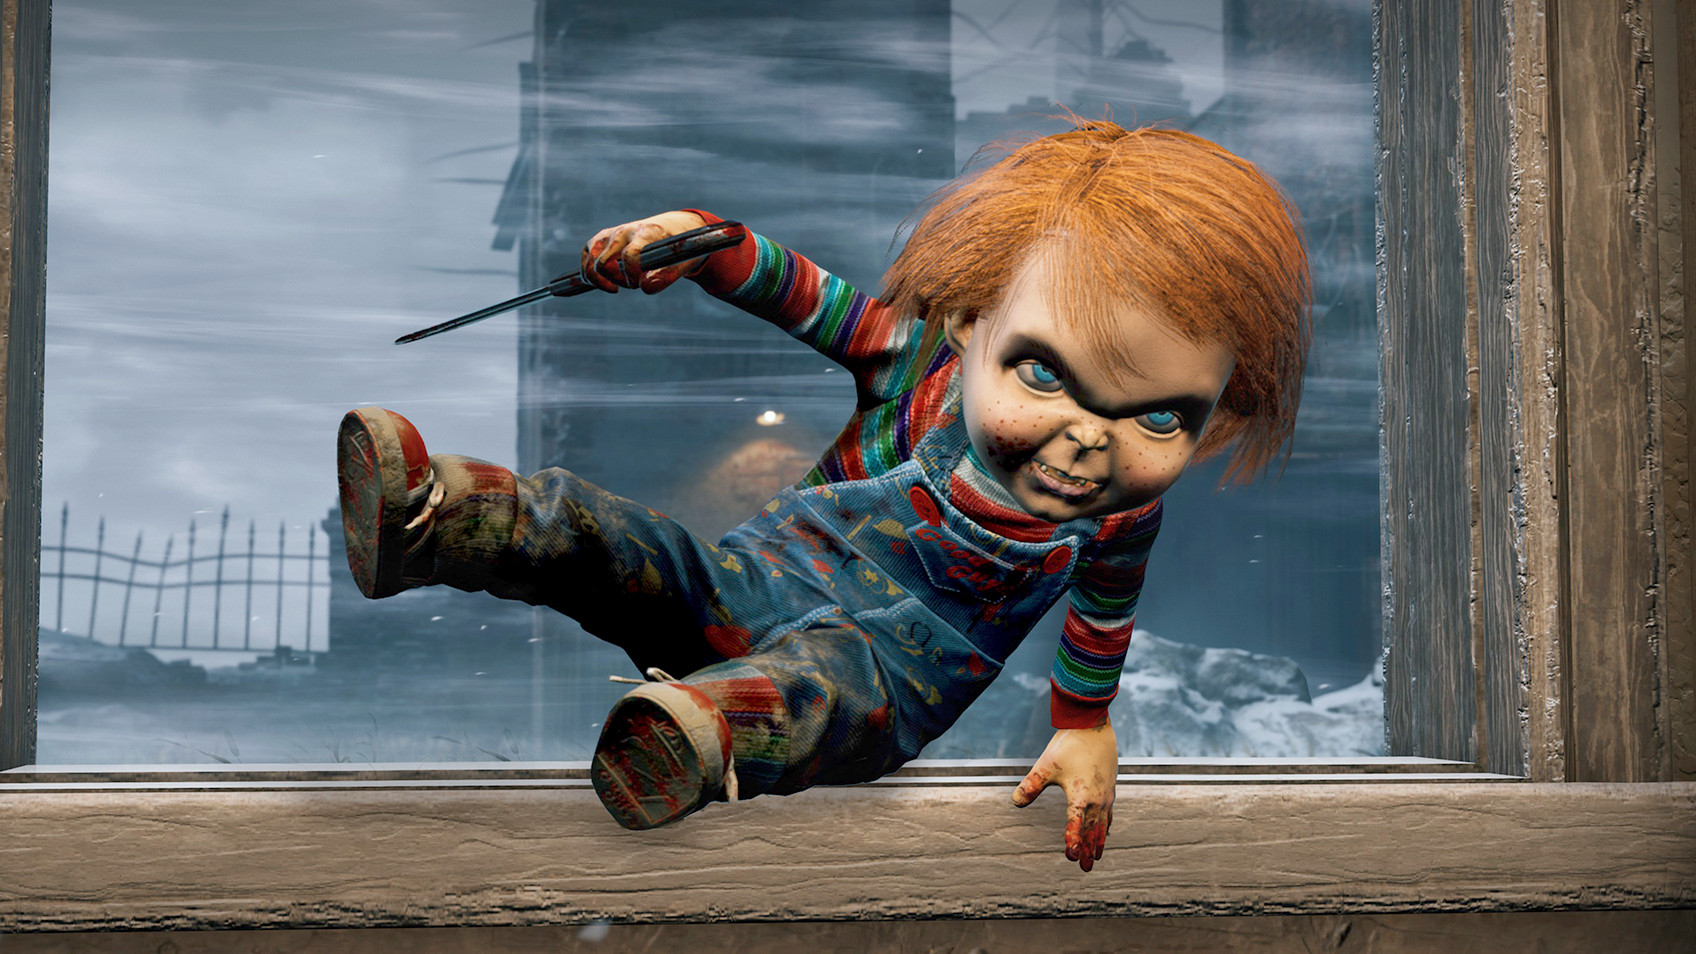 Chucky is the next Dead By Daylight killer, and I can’t stop laughing at a 2-foot-tall doll chasing teens